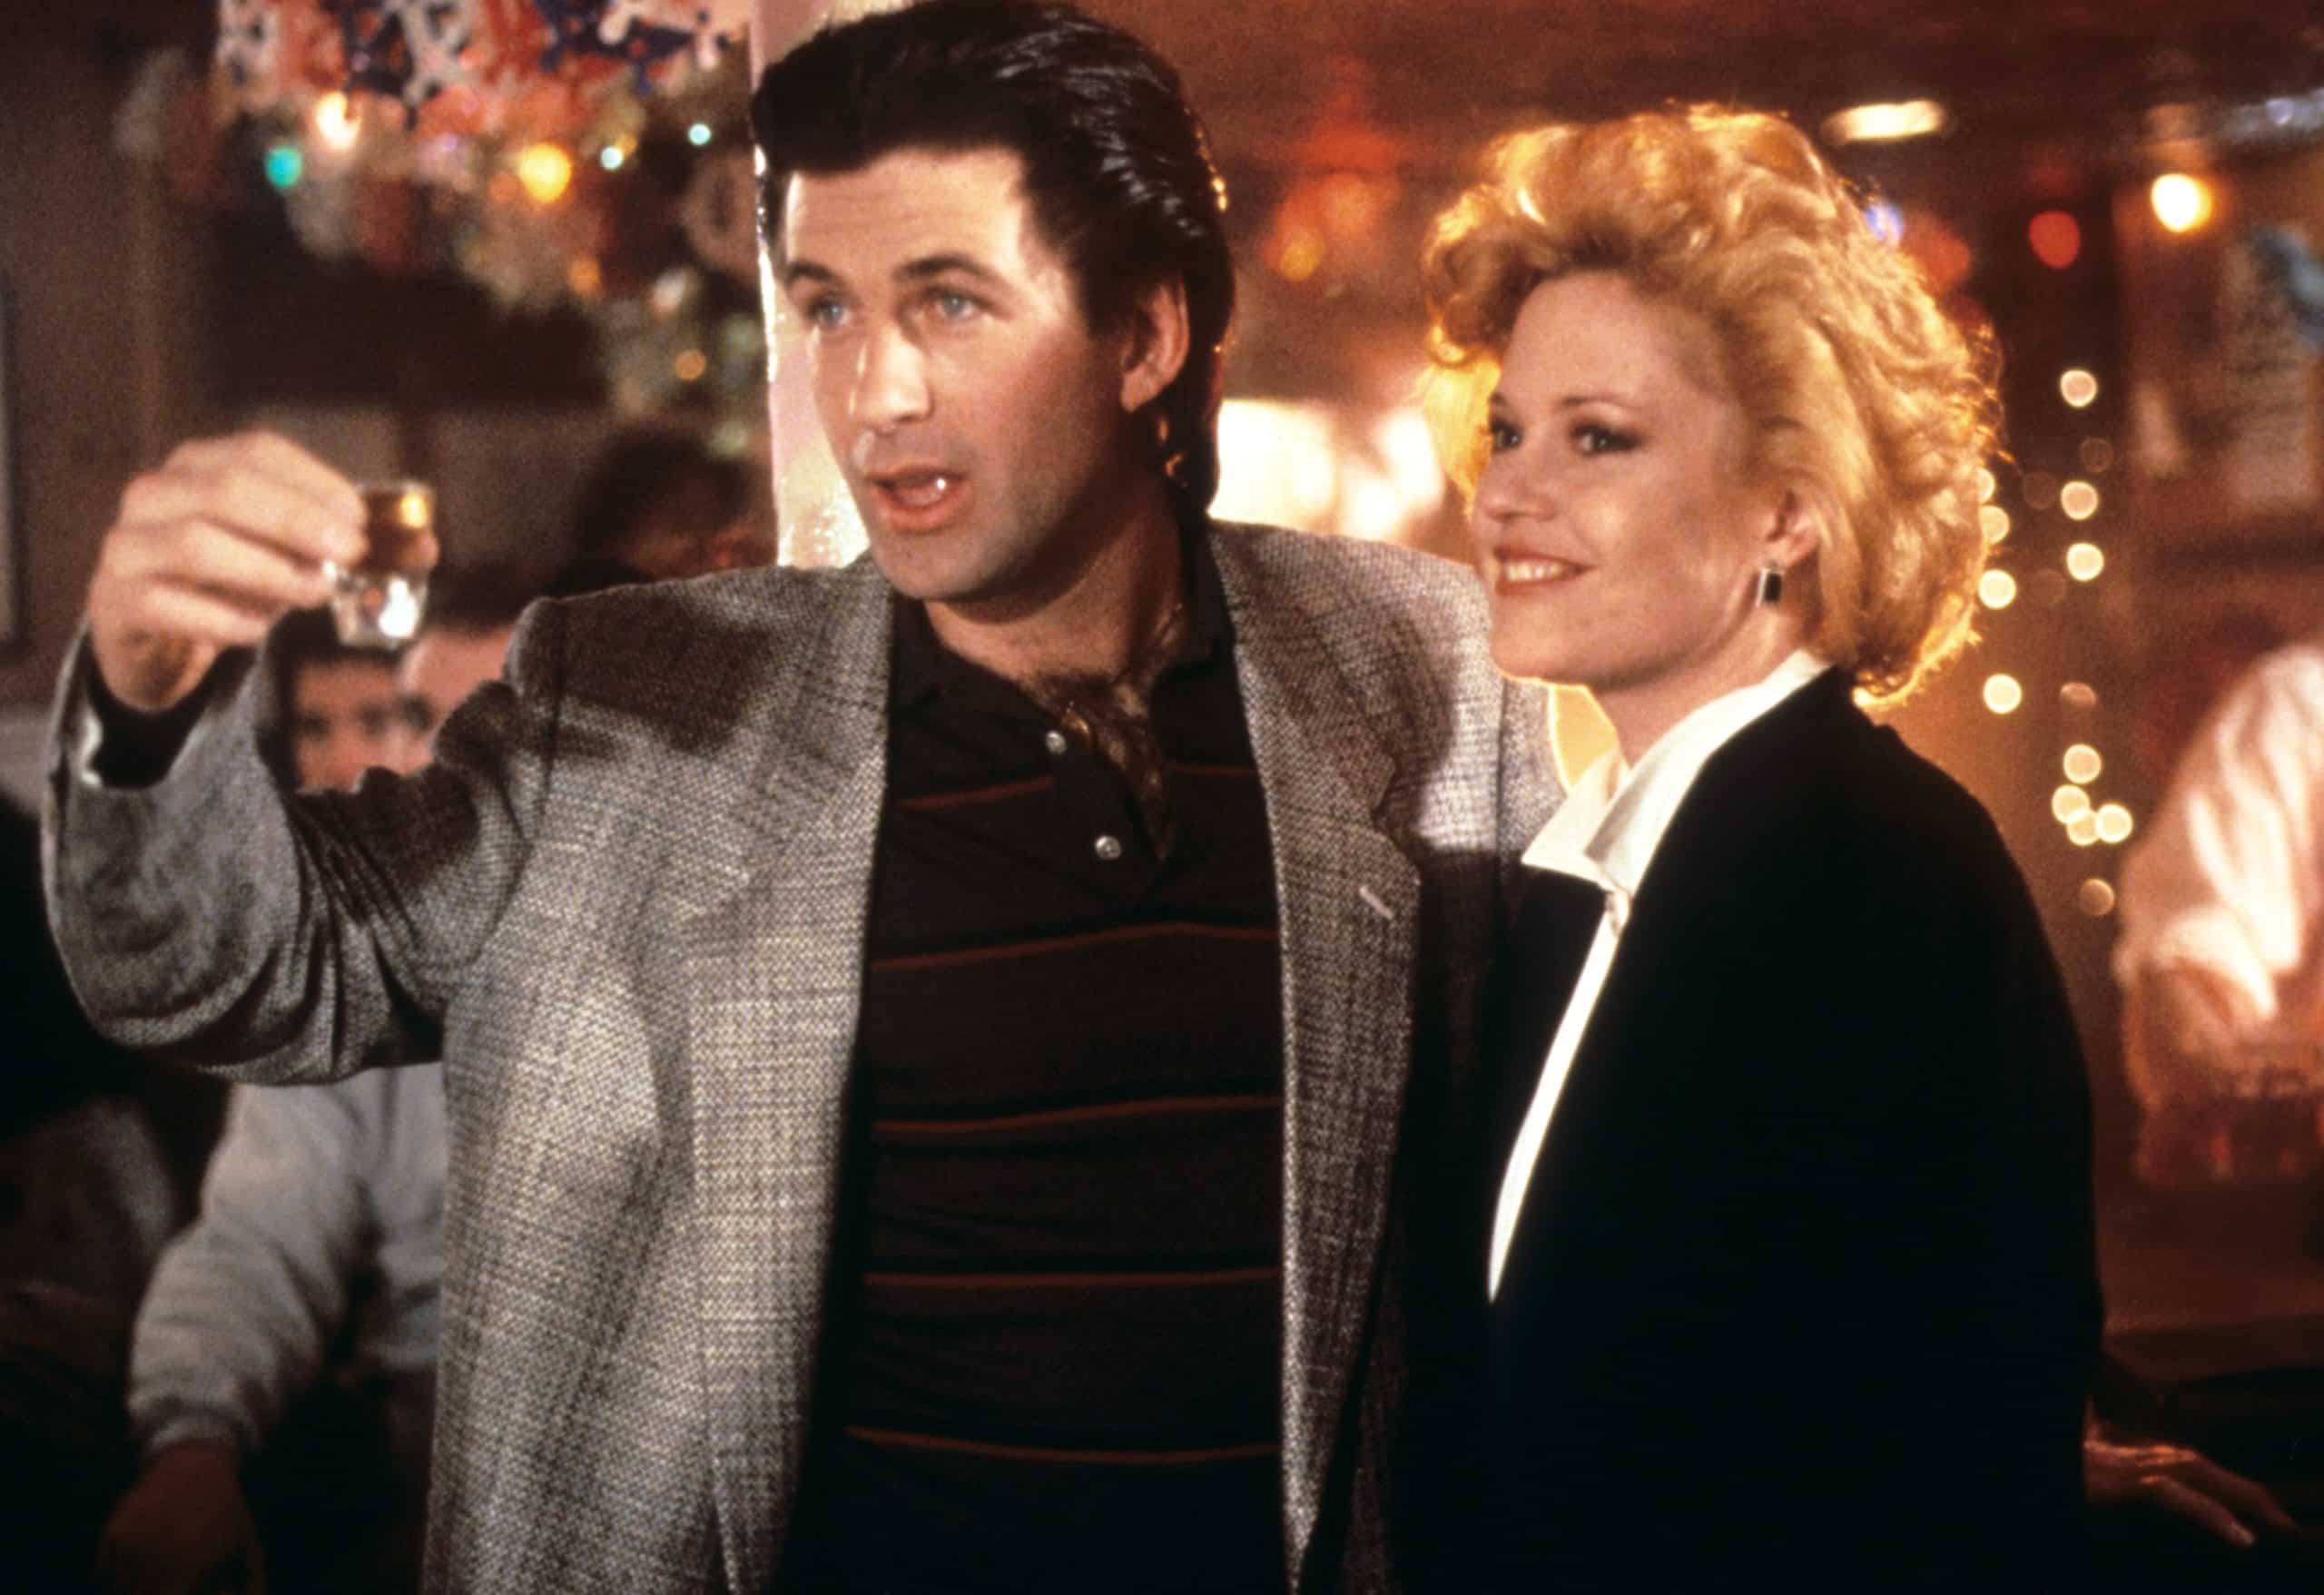 WORKING GIRL, from left: Alec Baldwin, Melanie Griffith, 1988